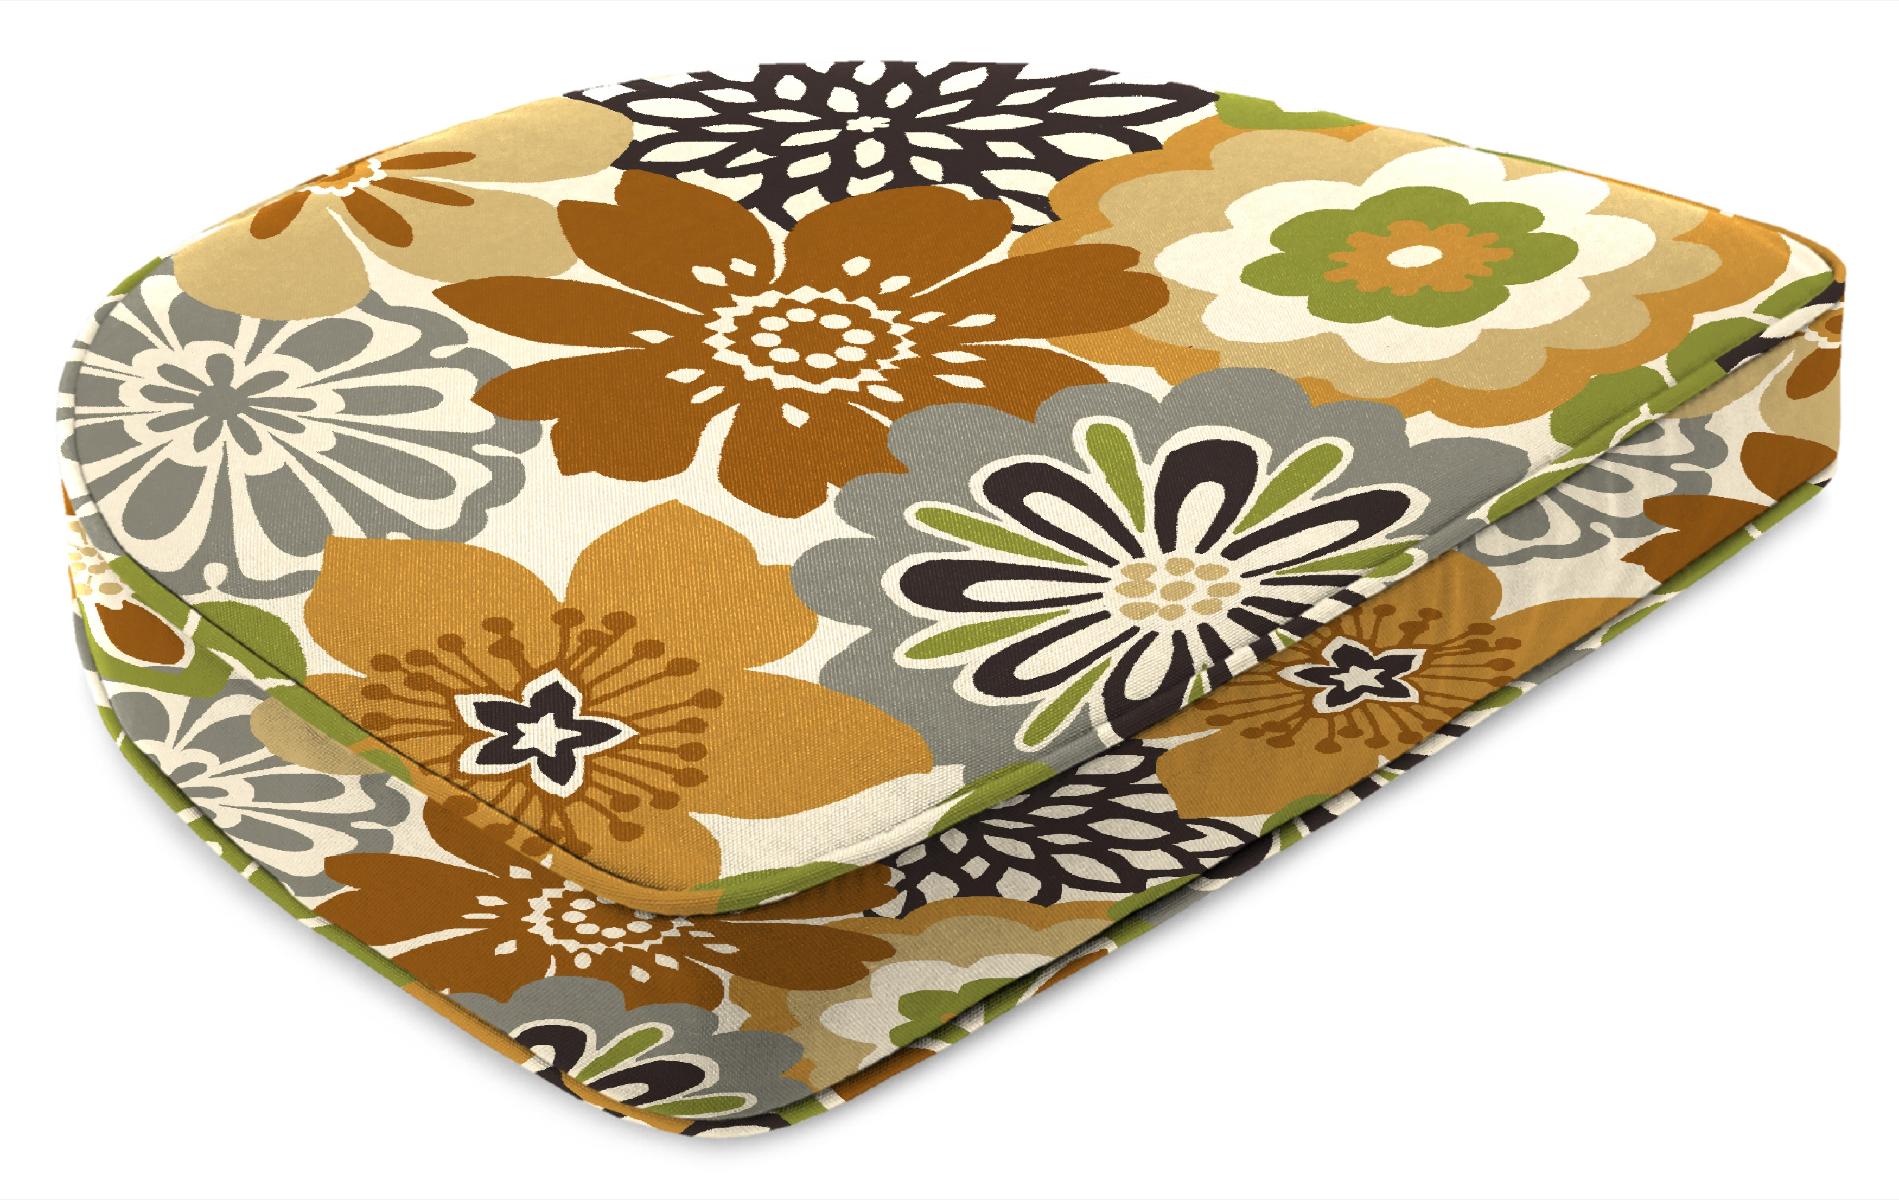 Contoured Boxed Chair Cushion in Camilla Maple